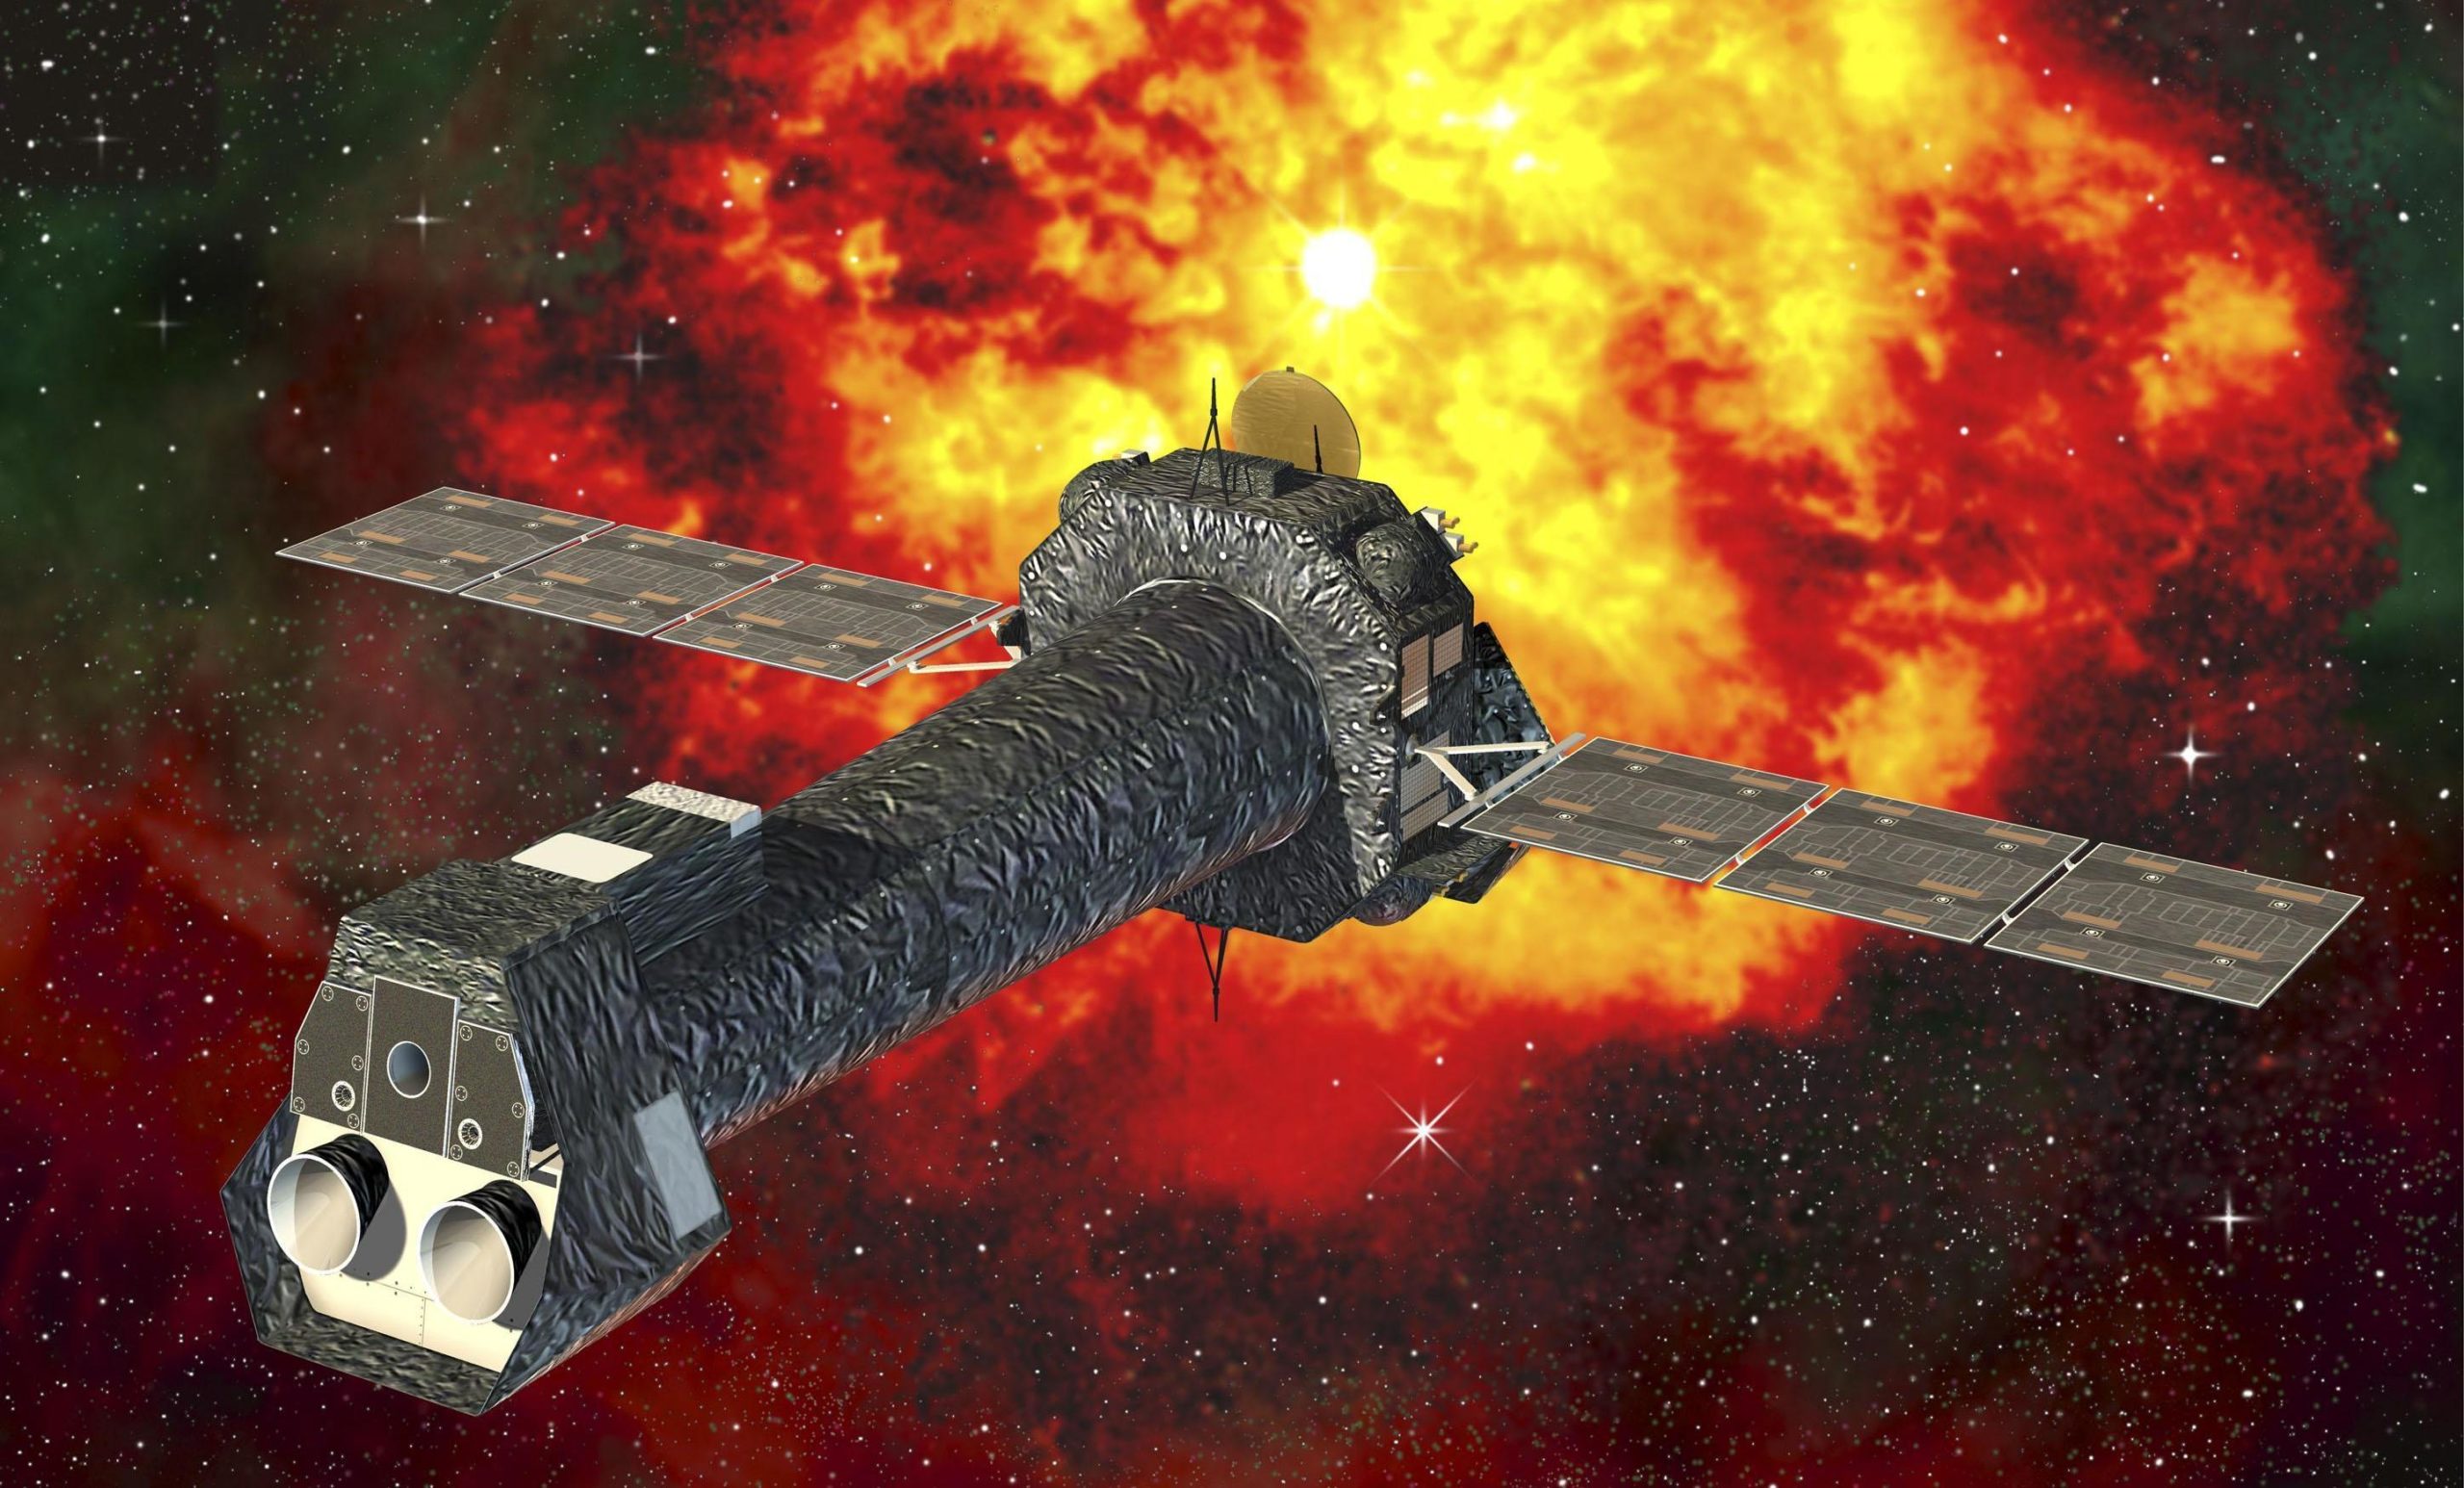 Image - An artistic rendering of the XMM-Newton (X-ray multi-mirror mission) space telescope. A study of archival data from the XMM-Newton and the Chandra X-ray space telescopes found evidence of high levels of X-ray emission from the nearby Magnificent Seven neutron stars, which may arise from the hypothetical particles known as axions. (Credits: D.Ducros; ESA/XMM-Newton, CC BY-SA 3.0 IGO)